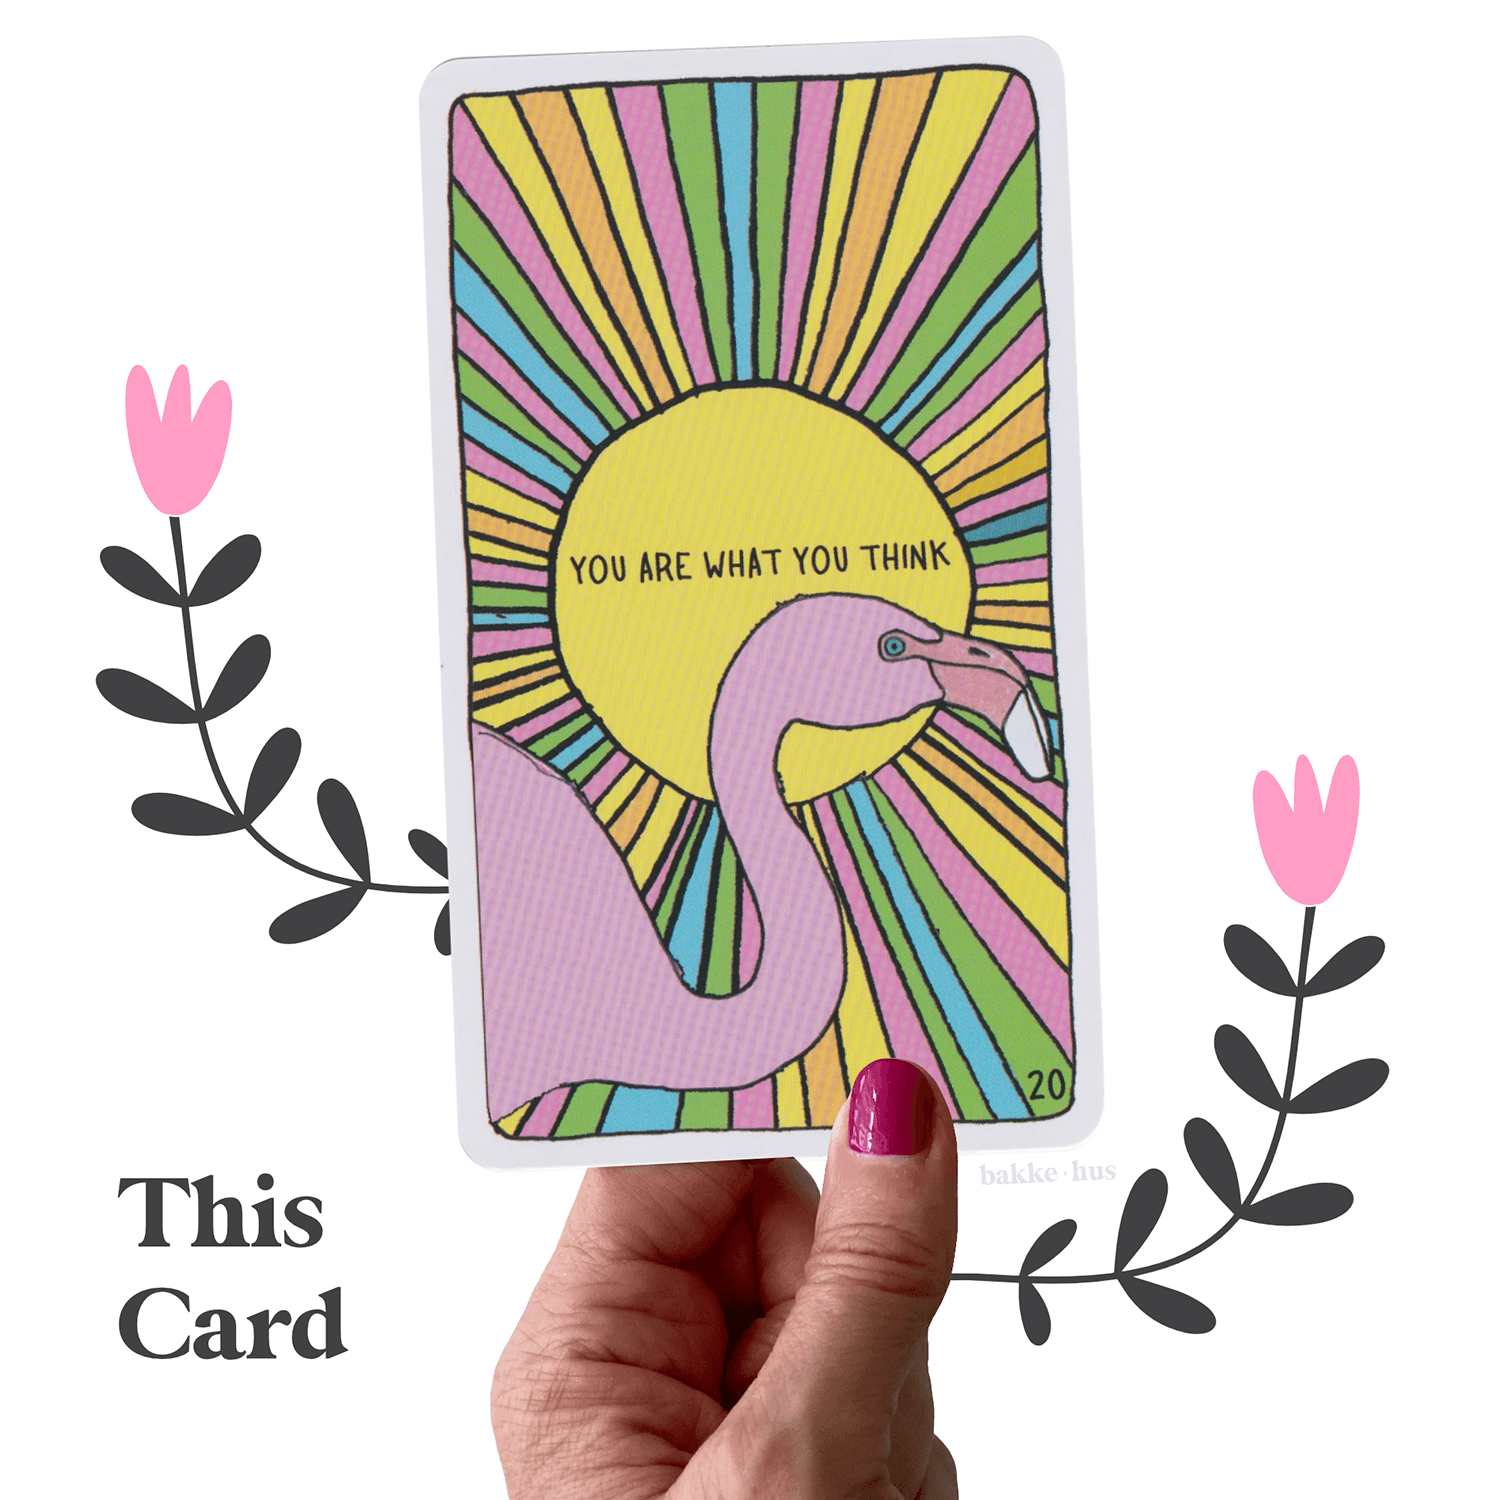 A female hand holding the Flamingo Oracle Card from Animal Apothecary Deck by Cara Elizabeth. The oracle card has the words 'You are what you think' written on it. The image also contains two pink & black illustrated flowers and the words 'This Card" and bakkehus logo.